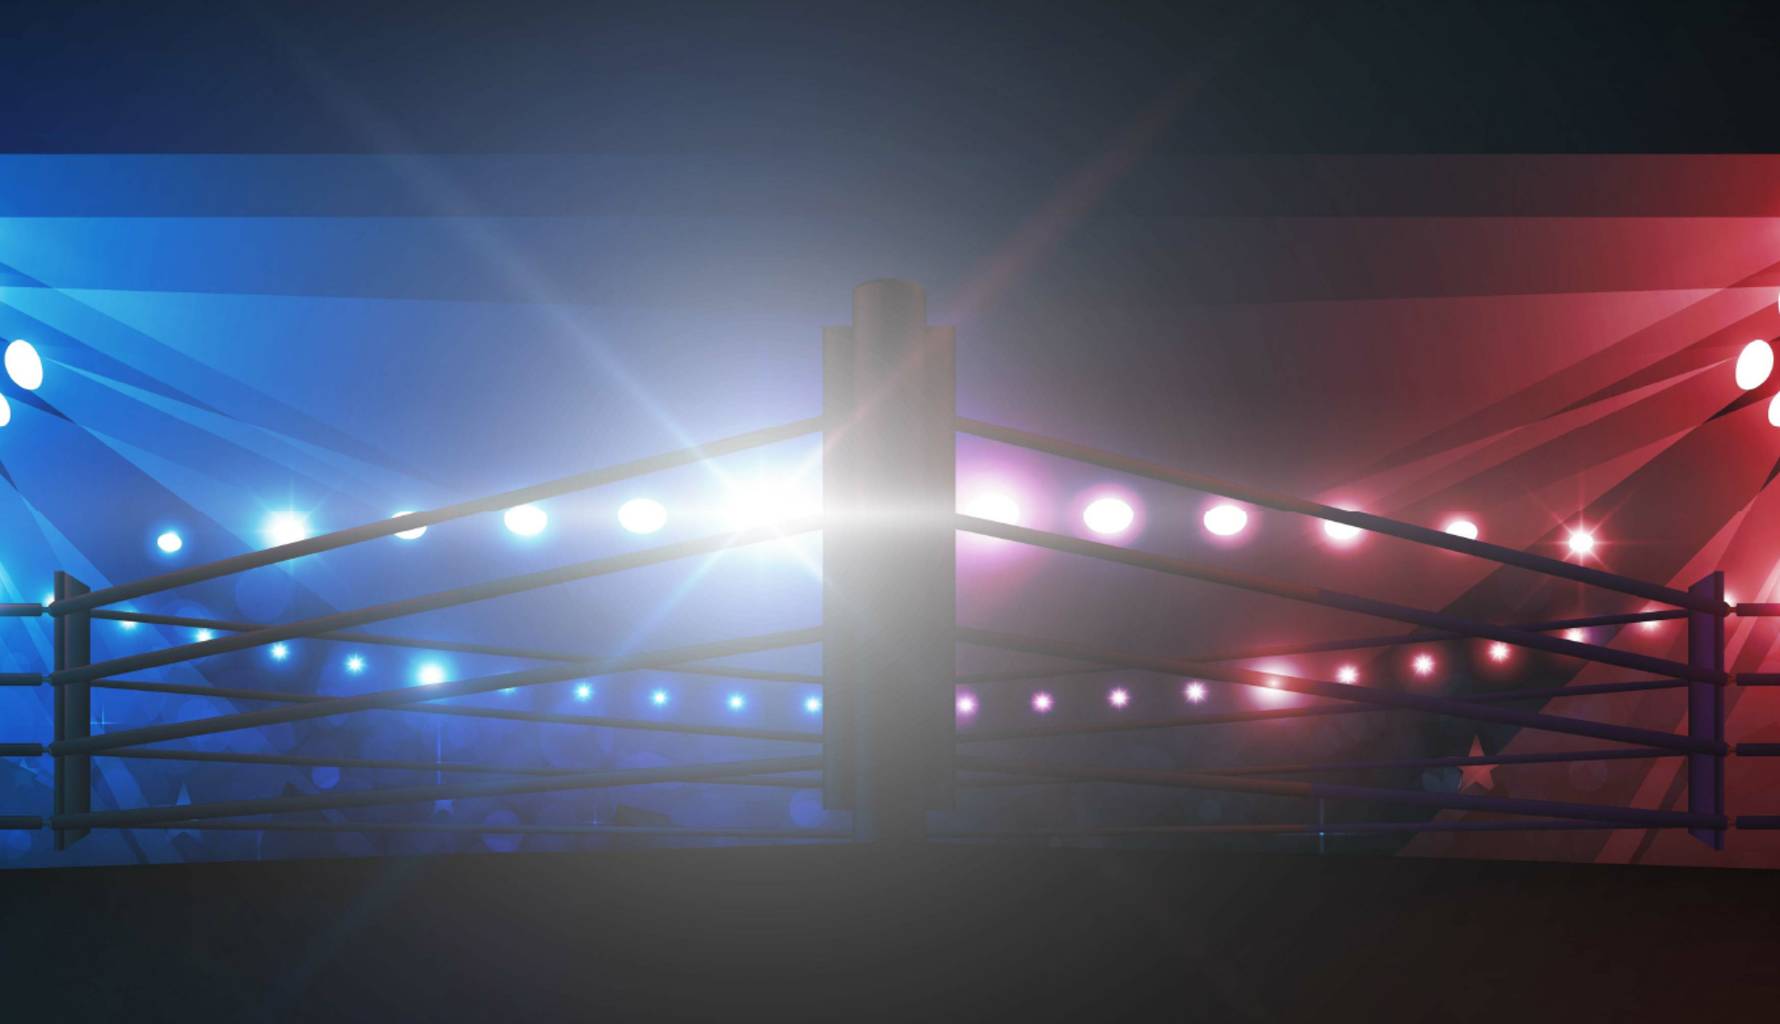 Boxing ring image with blue and red lighting